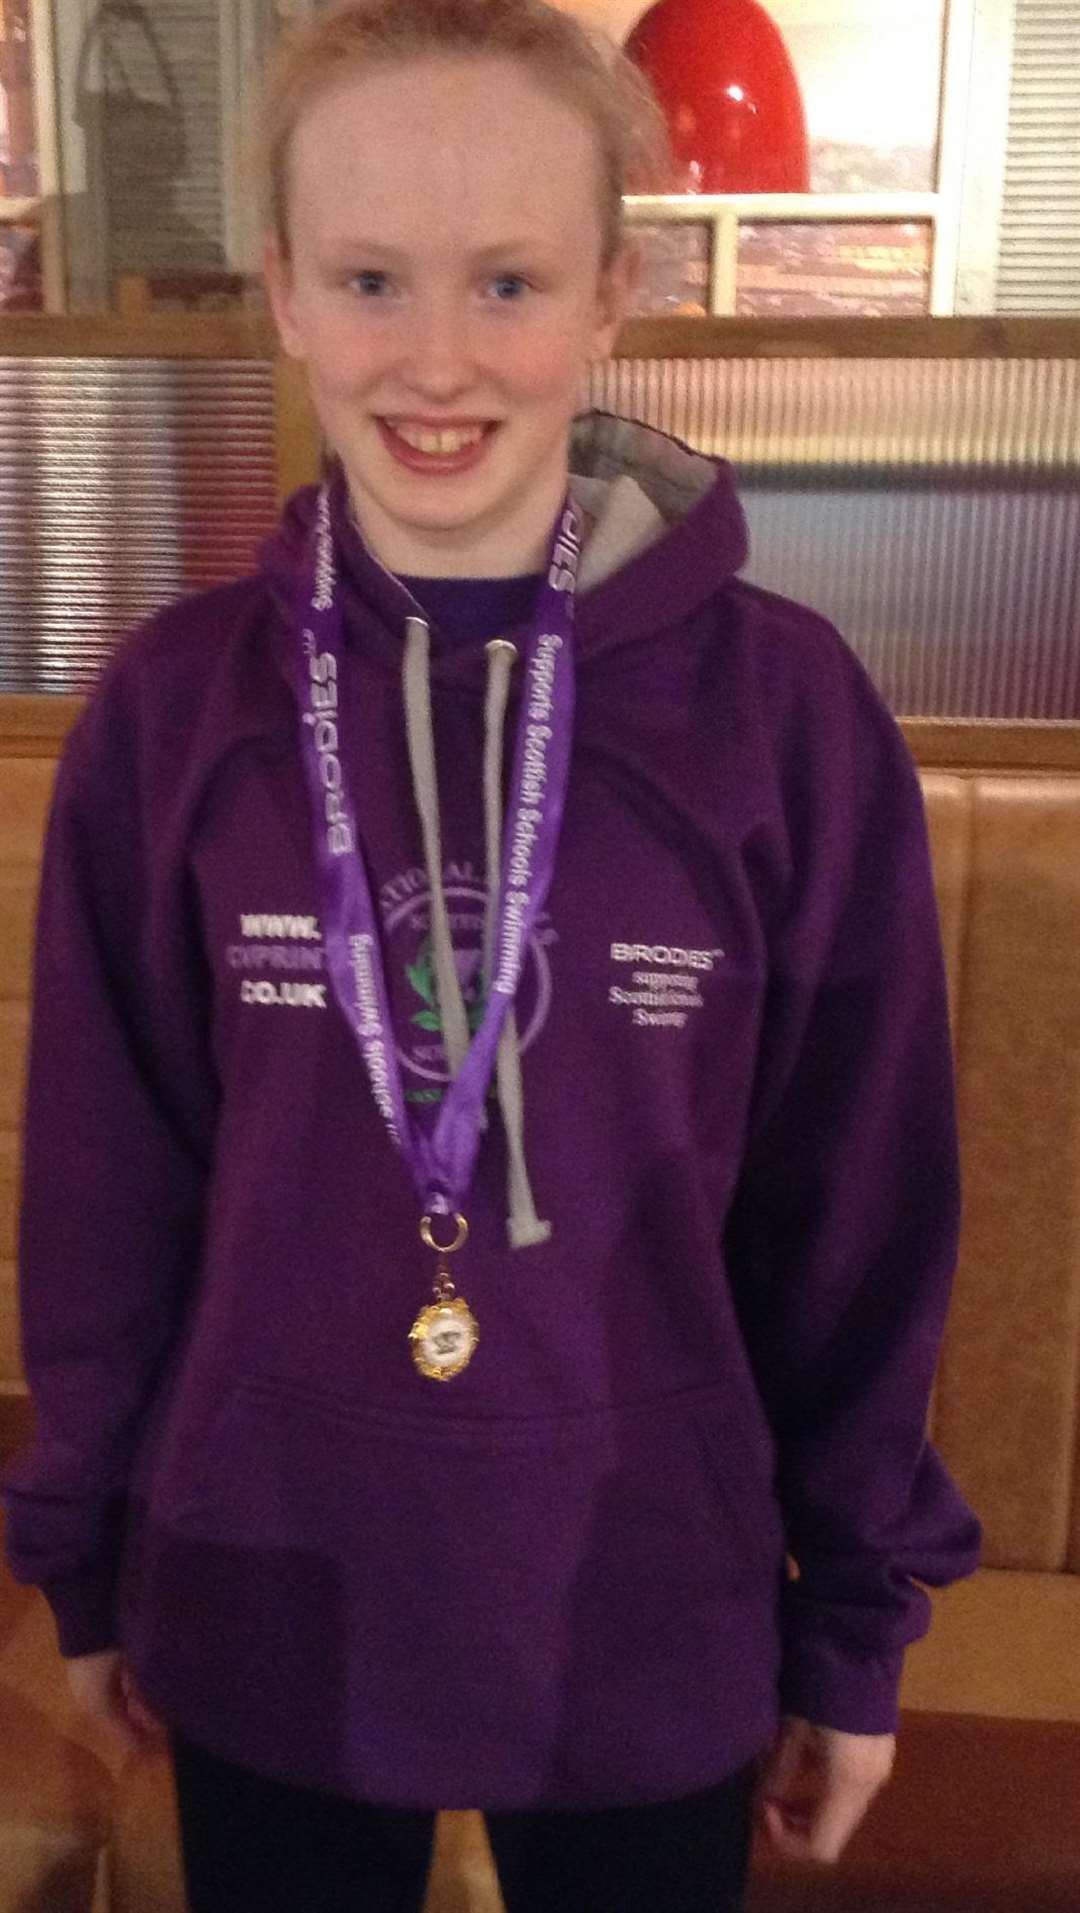 Emma Mill is the Scottish 50 metre butterfly champion.